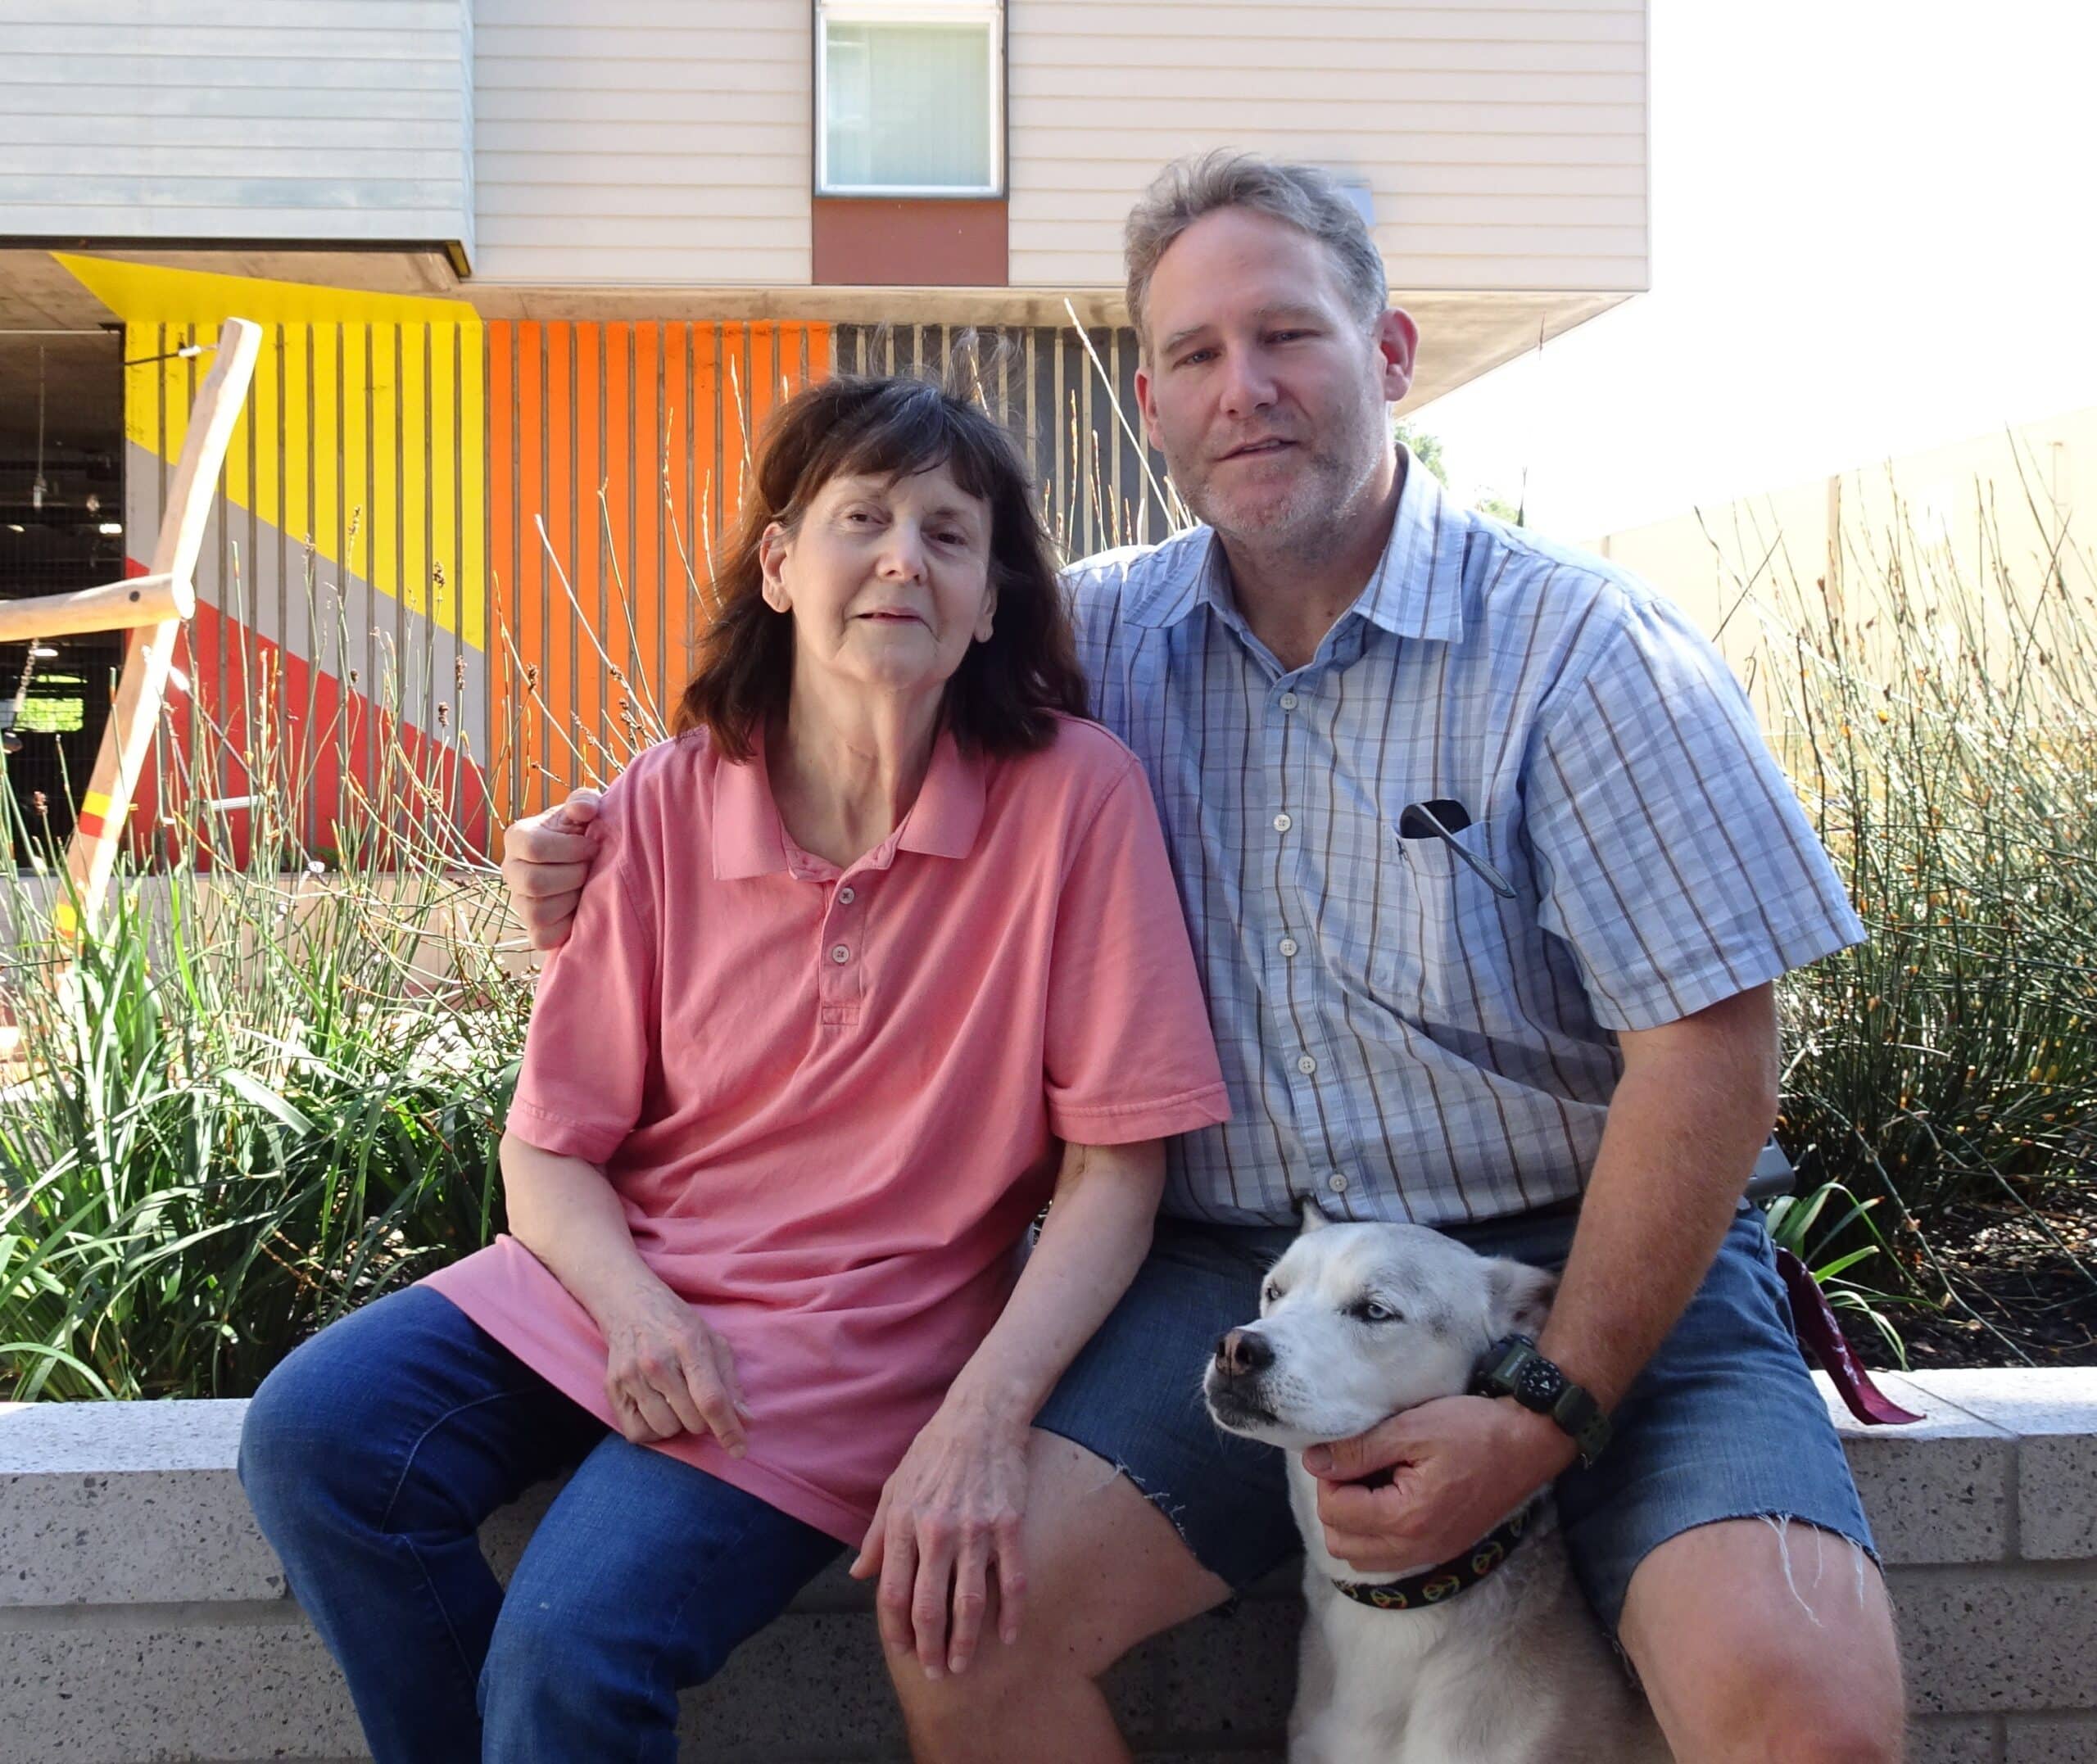 Phillip and Marjorie - with their dog Sasha - at home at Edwina Benner Plaza in Sunnyvale